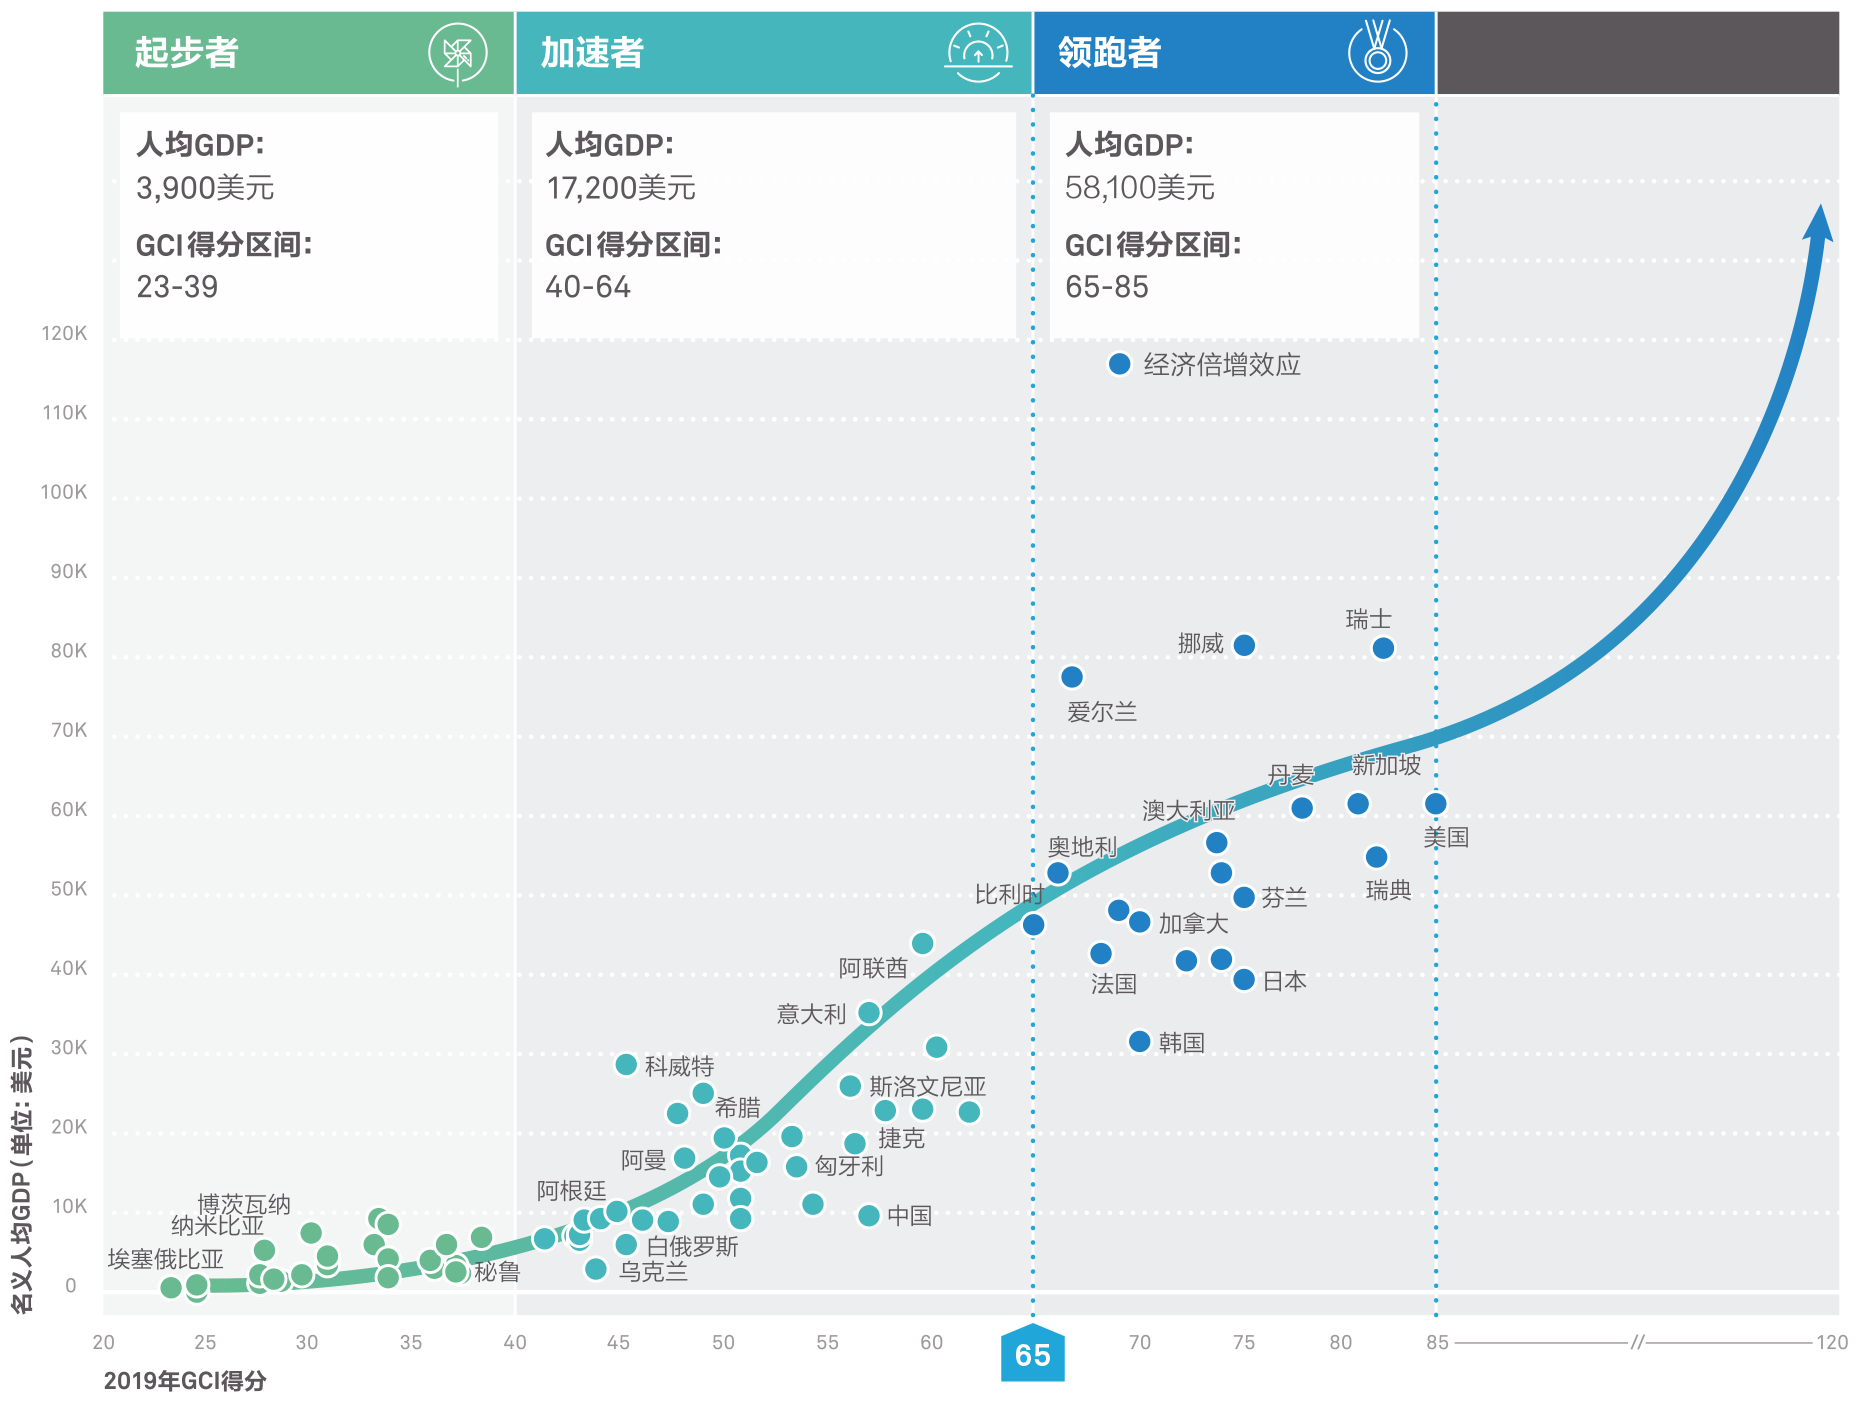 homepage-graph1-cn.png